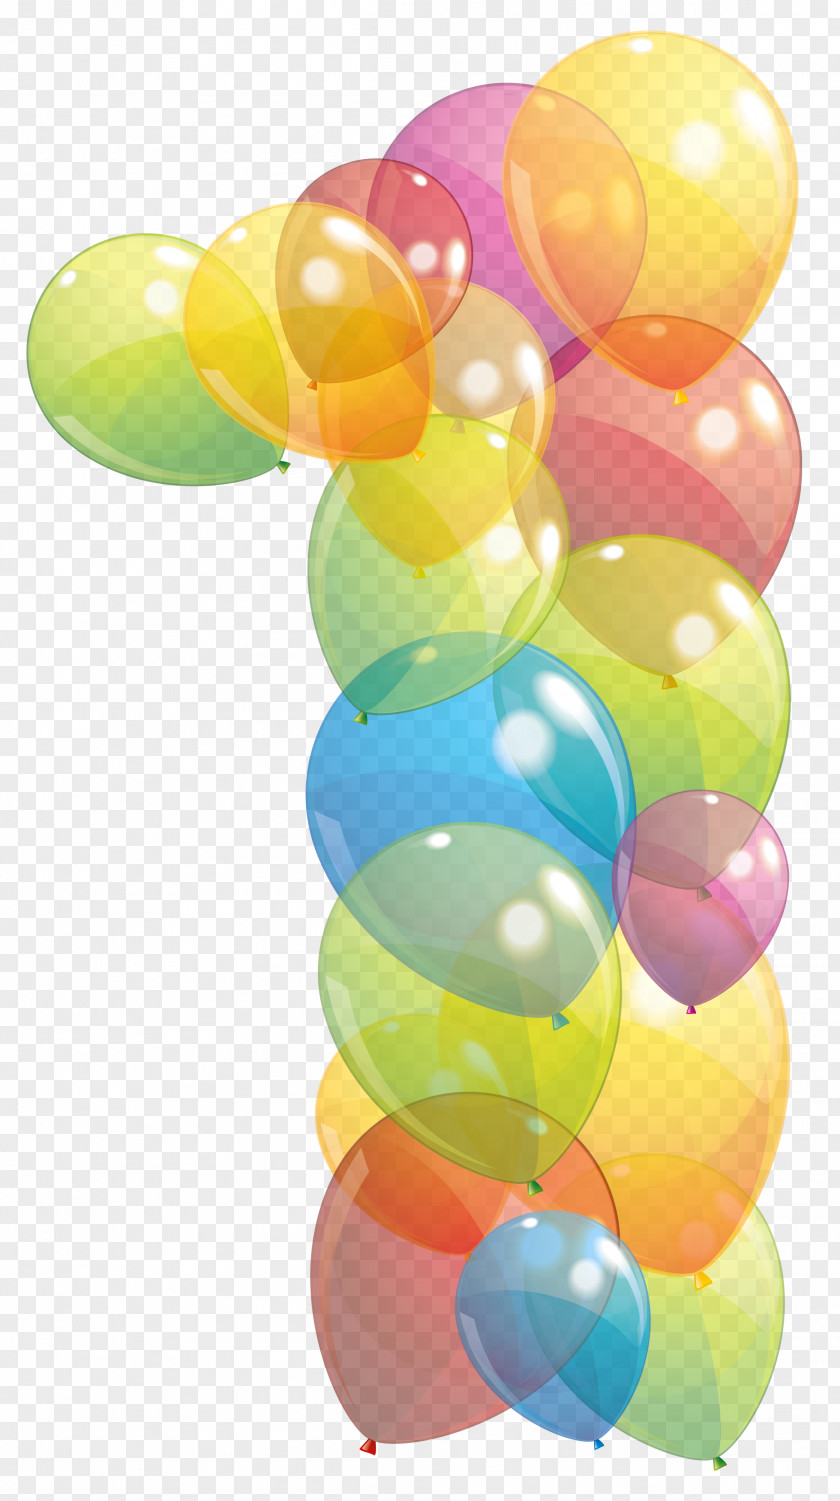 Transparent One Number Of Balloons Clipart Image Yellow Balloon PNG